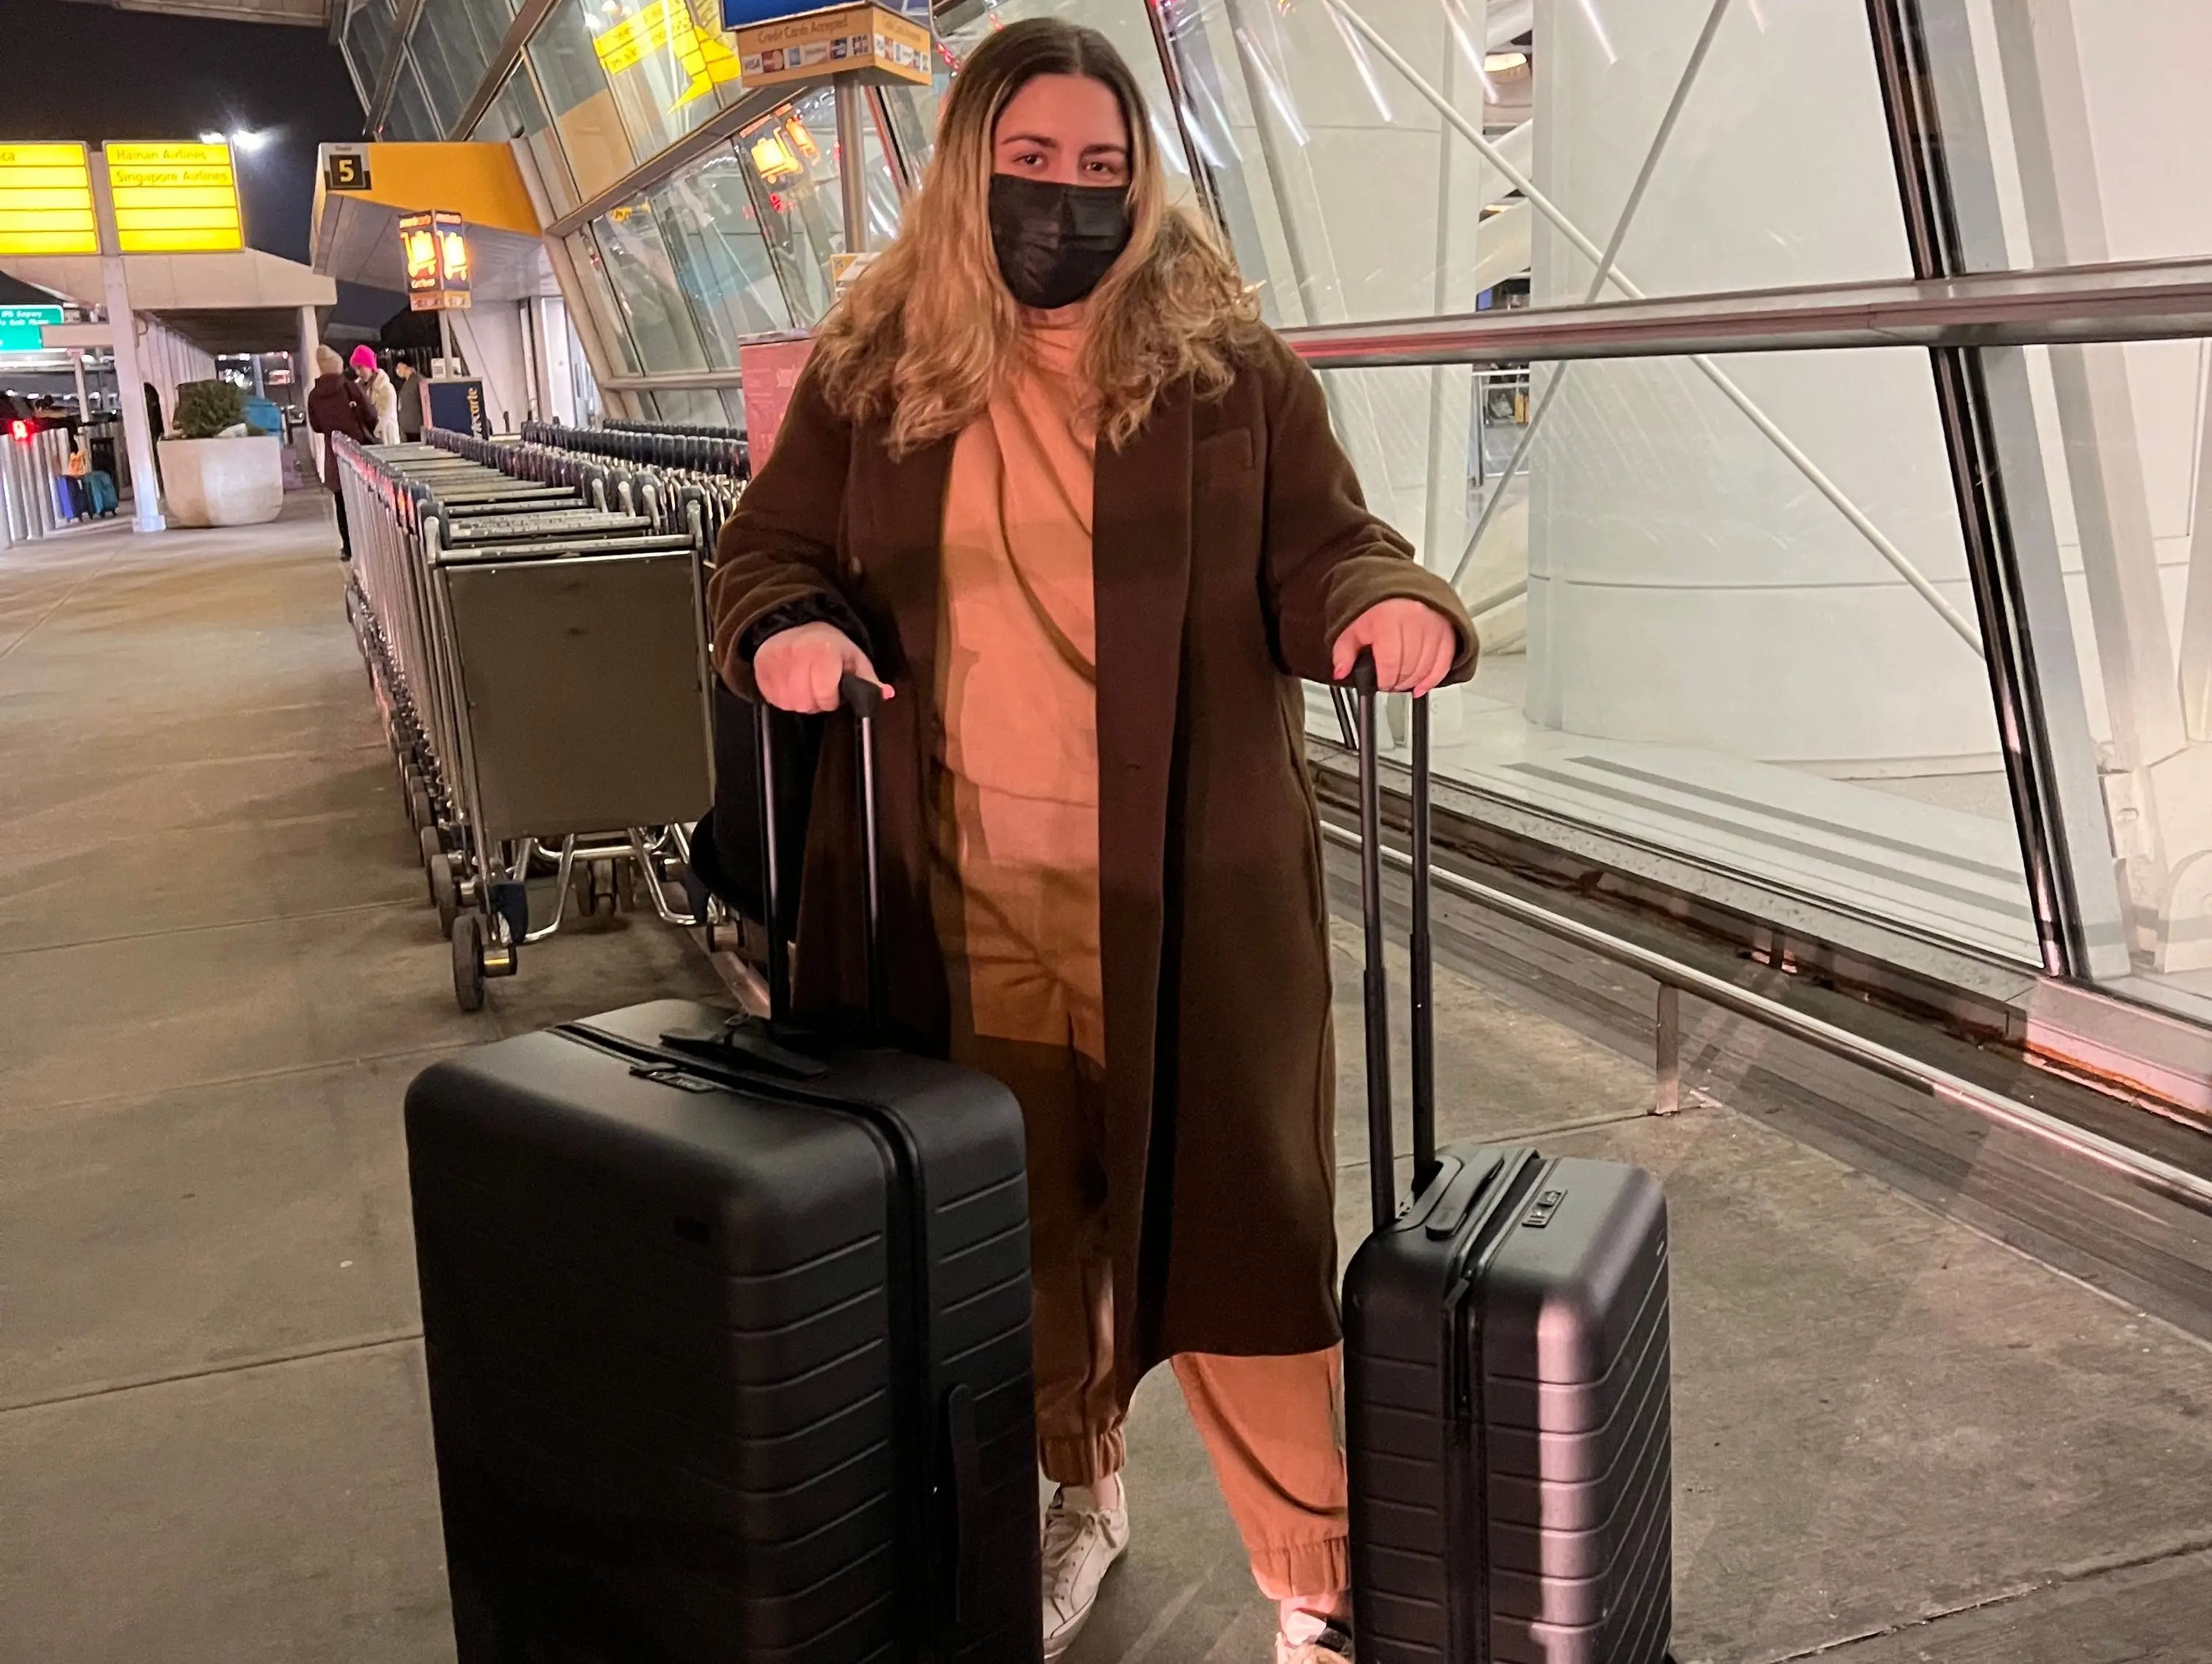 The writer with two suitcases and a mask on, leaving for her trip at the airport.